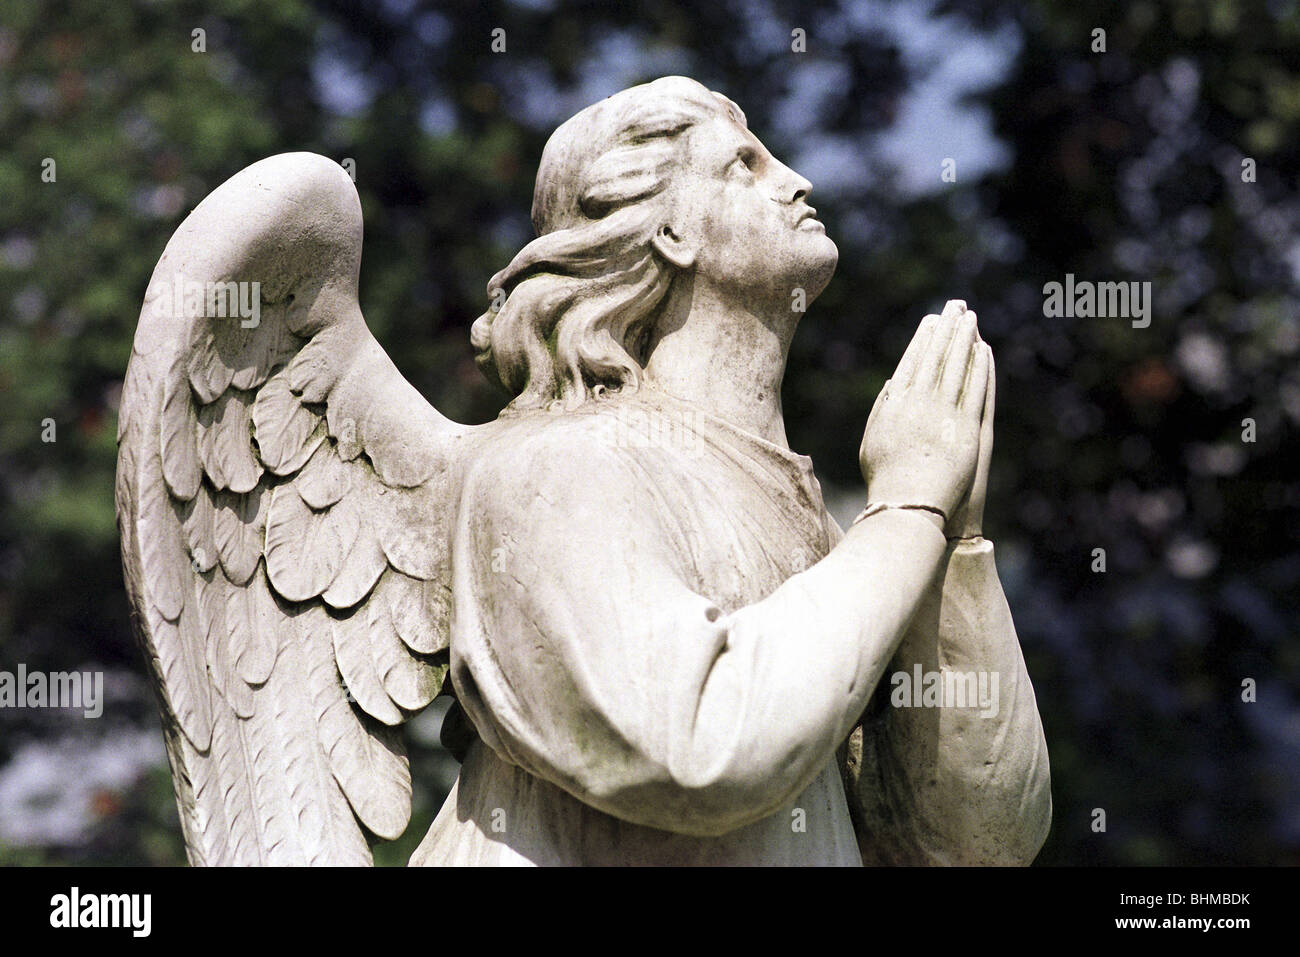 Angel sculpture at the Novodevichy Cemetery, Moscow, Russia Stock Photo